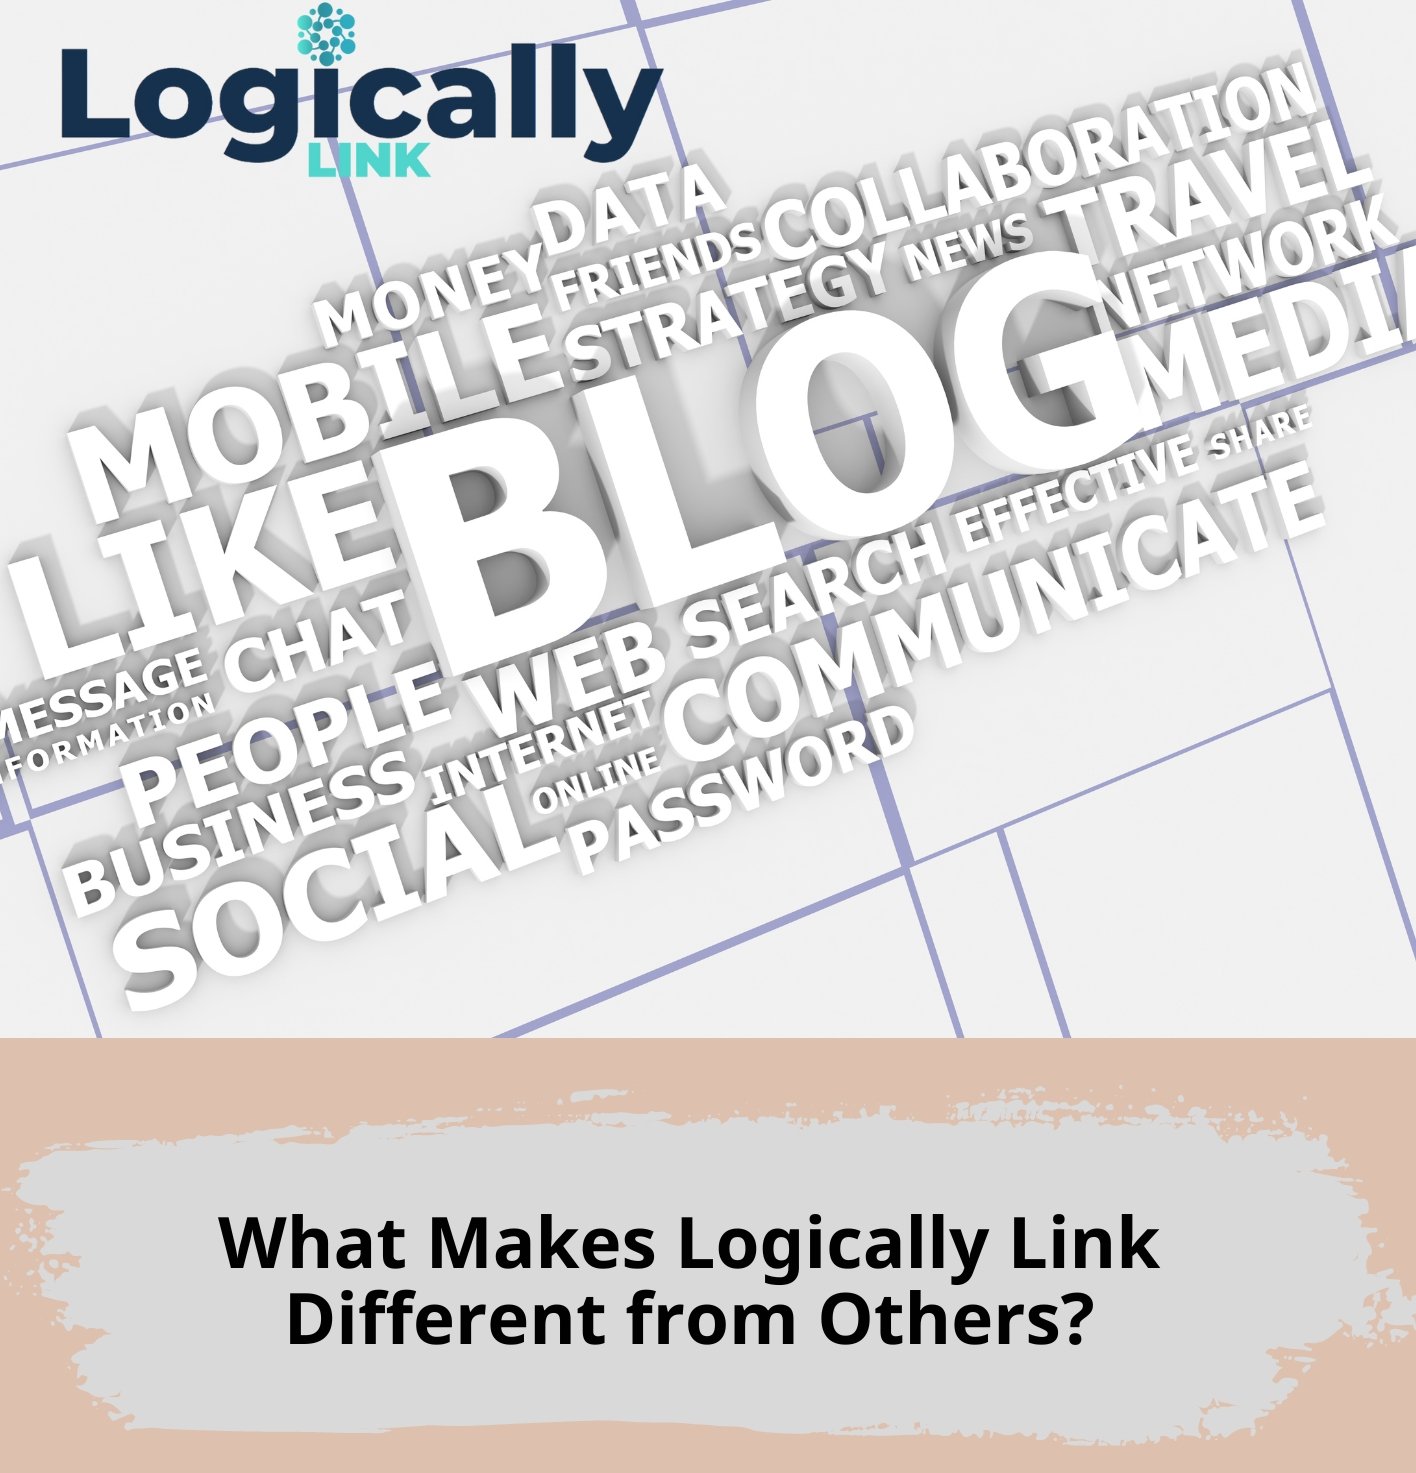 What Makes Logically Link Different from Others?